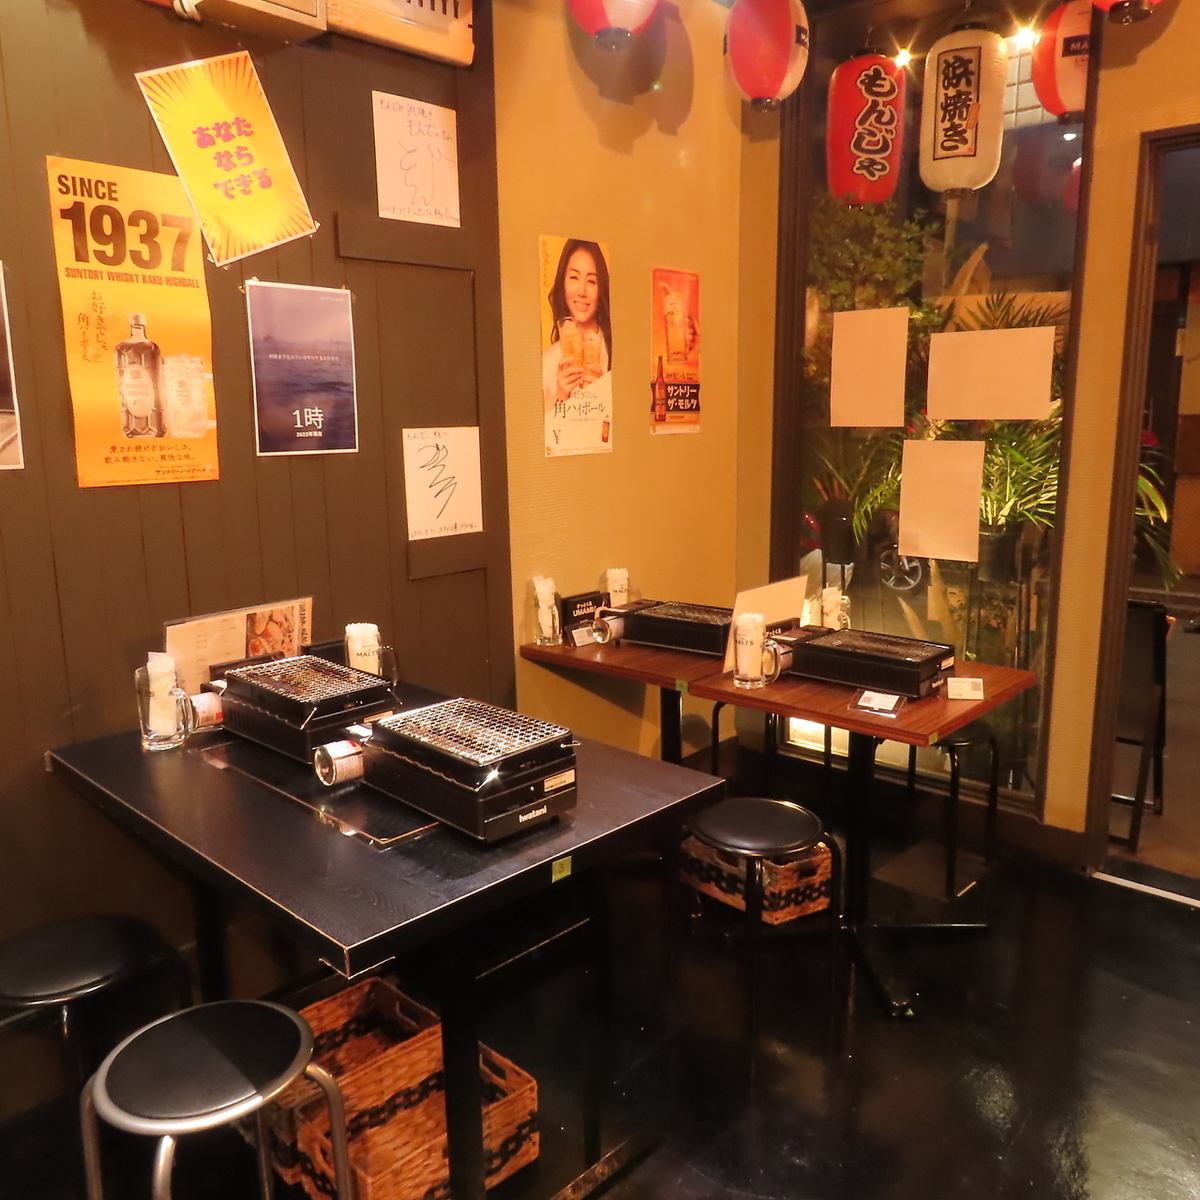 Would you like to spend a relaxing time in a Kyoto-style store?